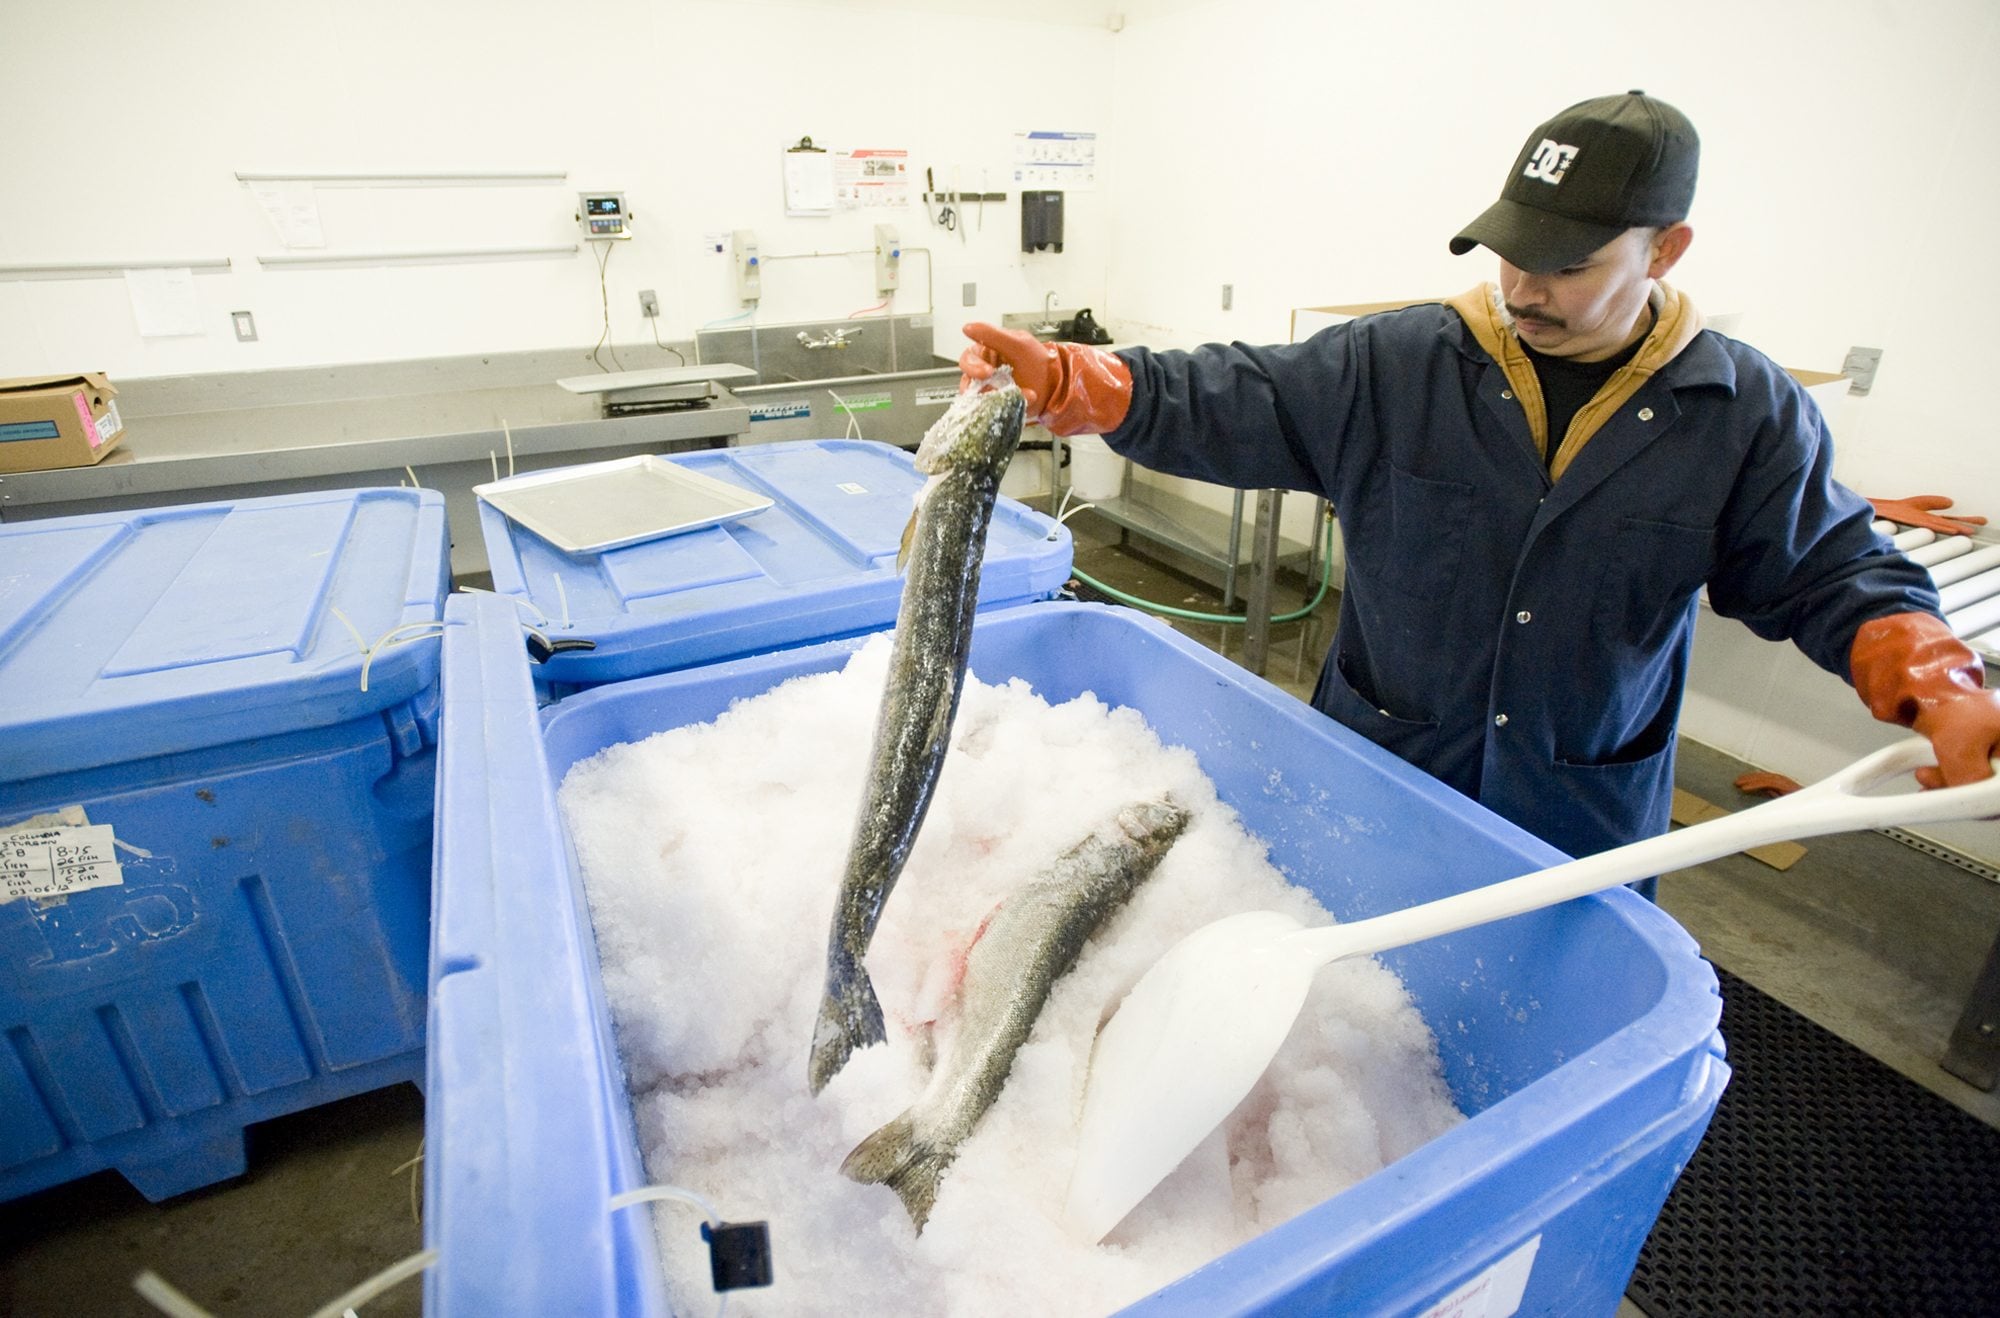 Javier Meza unpacks fresh steelhead trout Tuesday at Foods in Season, which has built up its operations at the Port of Camas-Washougal's industrial park.